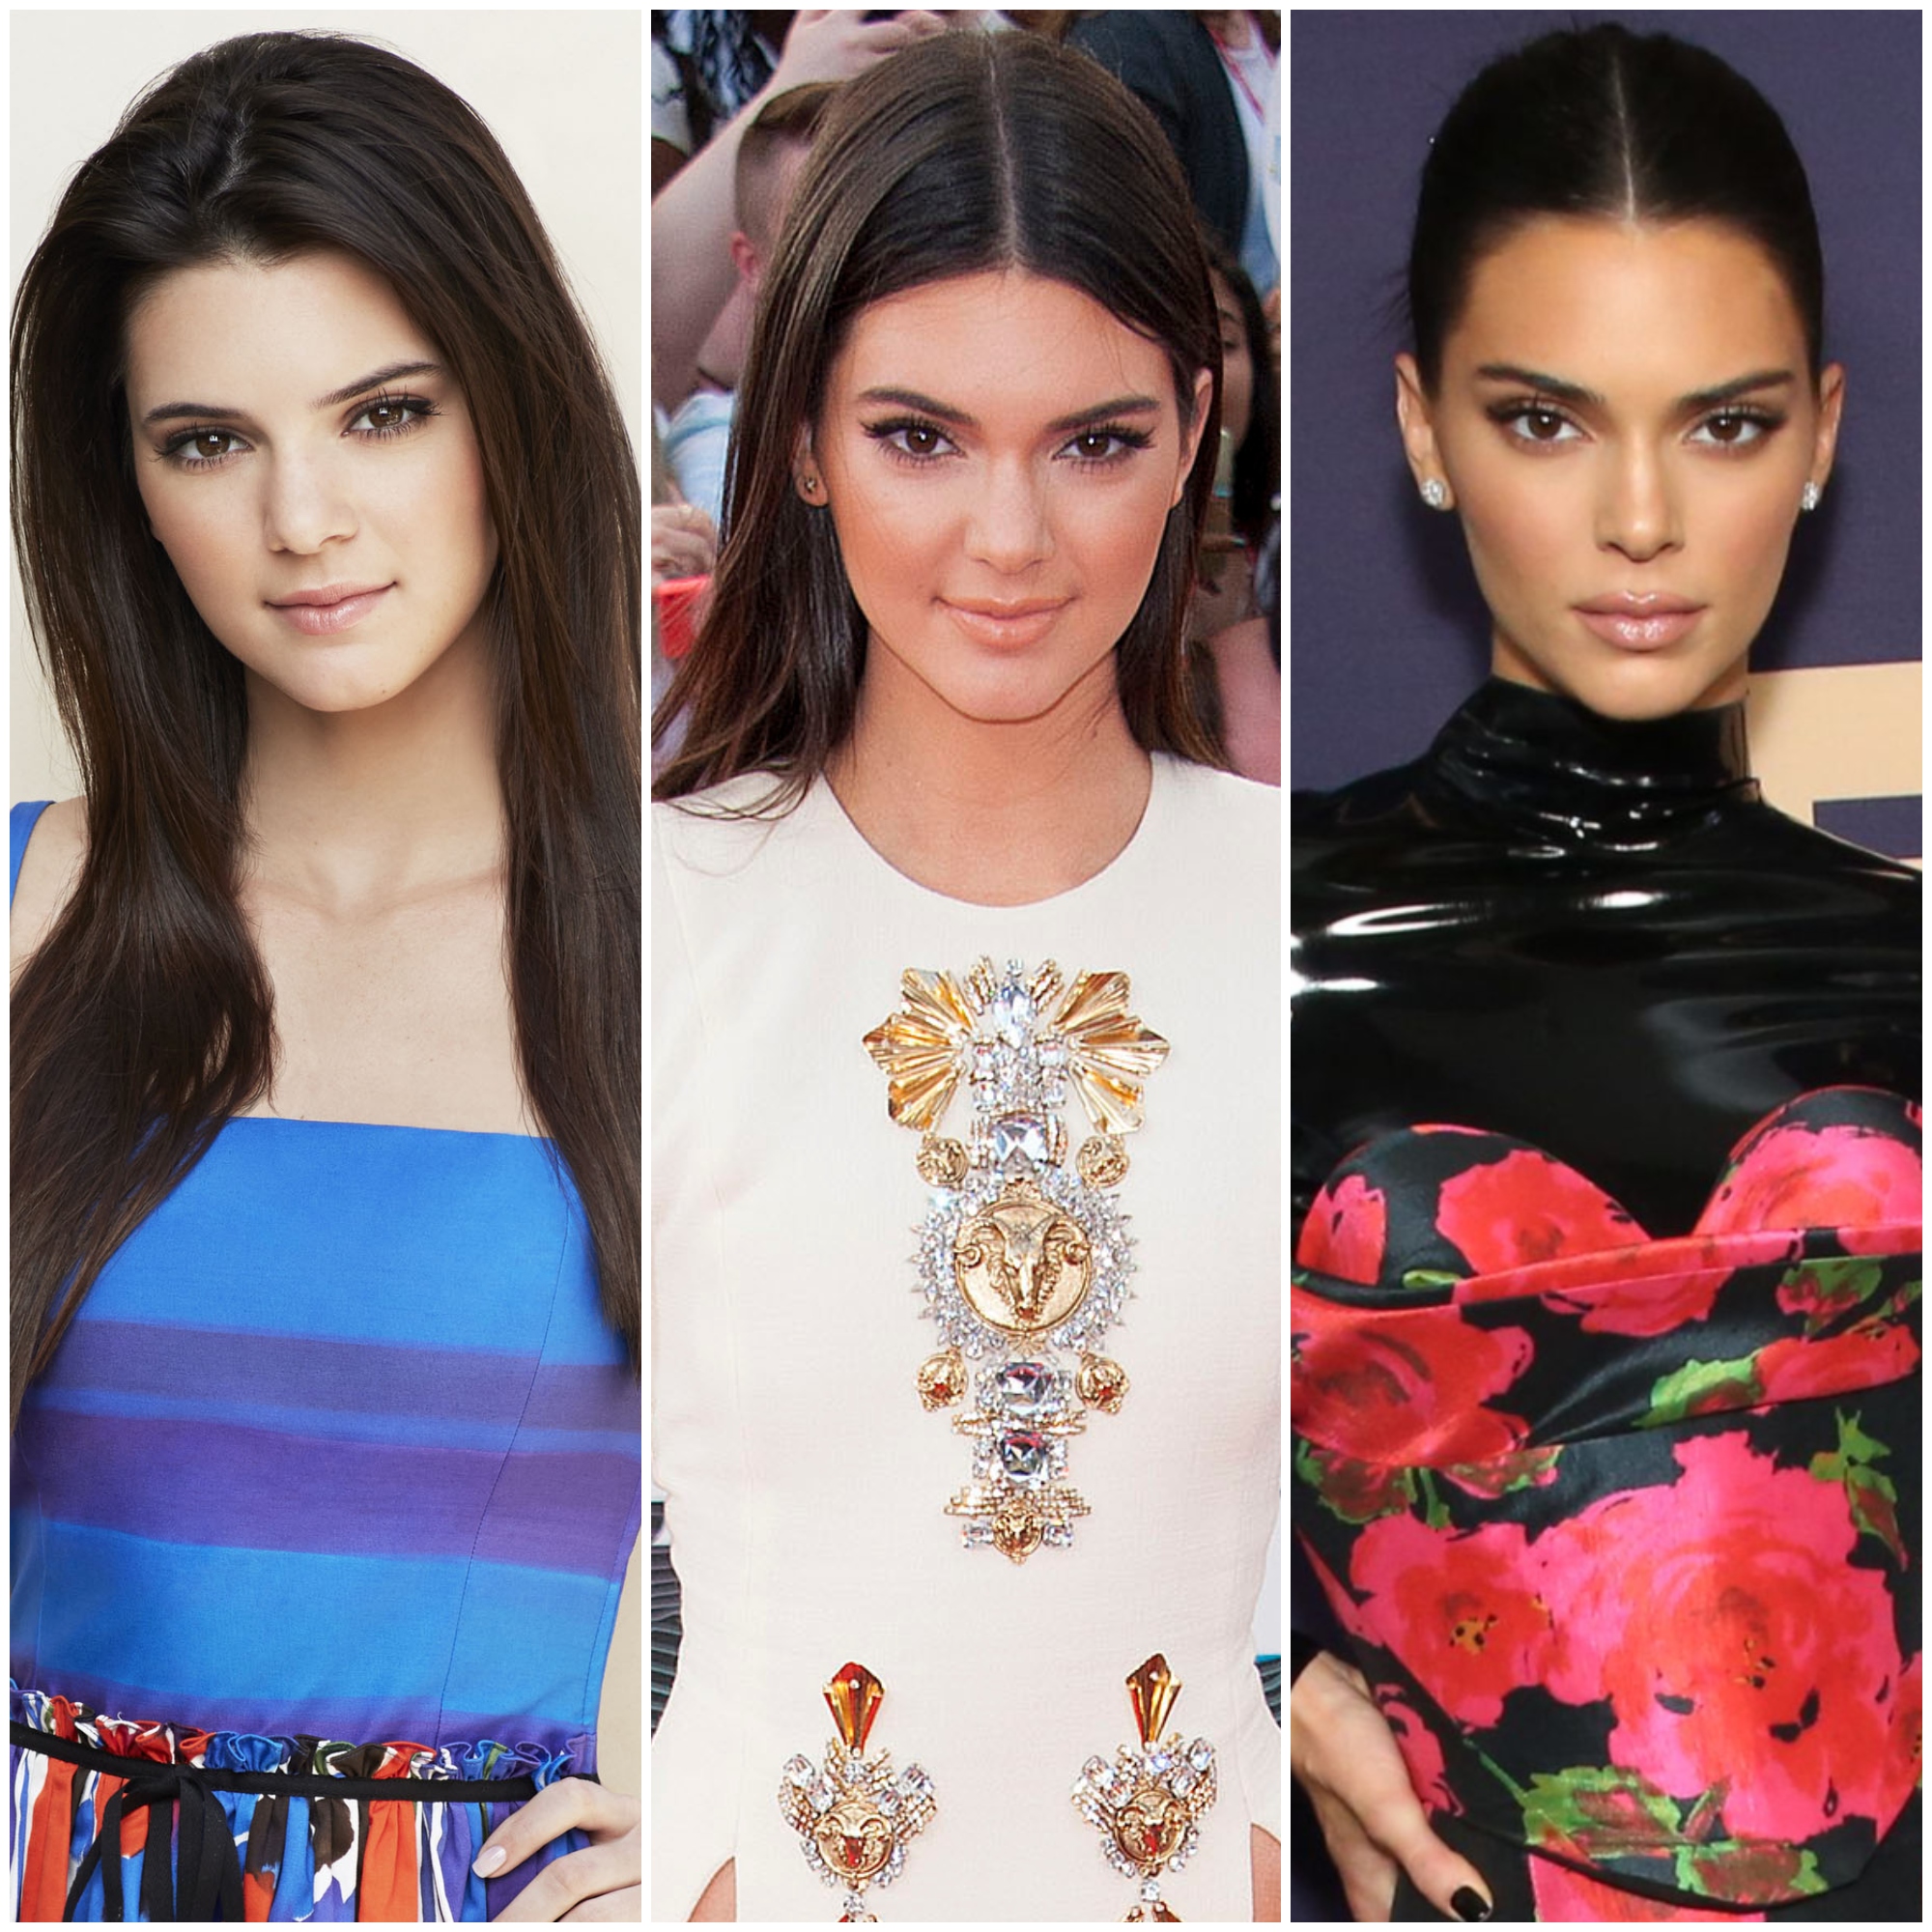 Kendall Jenner 2020 Photoshoot Wallpapers